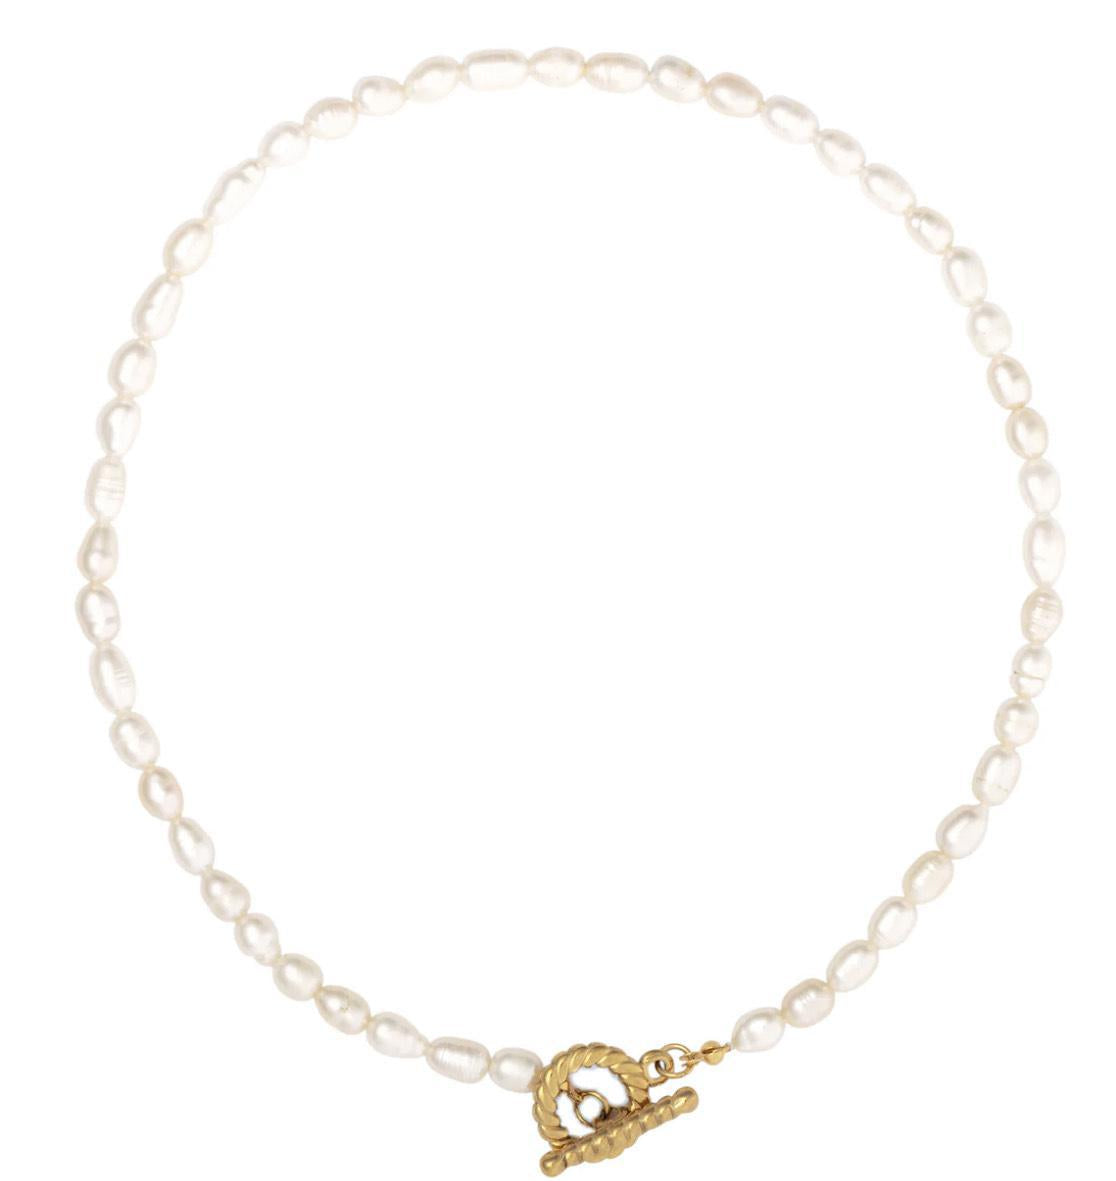 Miki Pearl Toggle Necklace